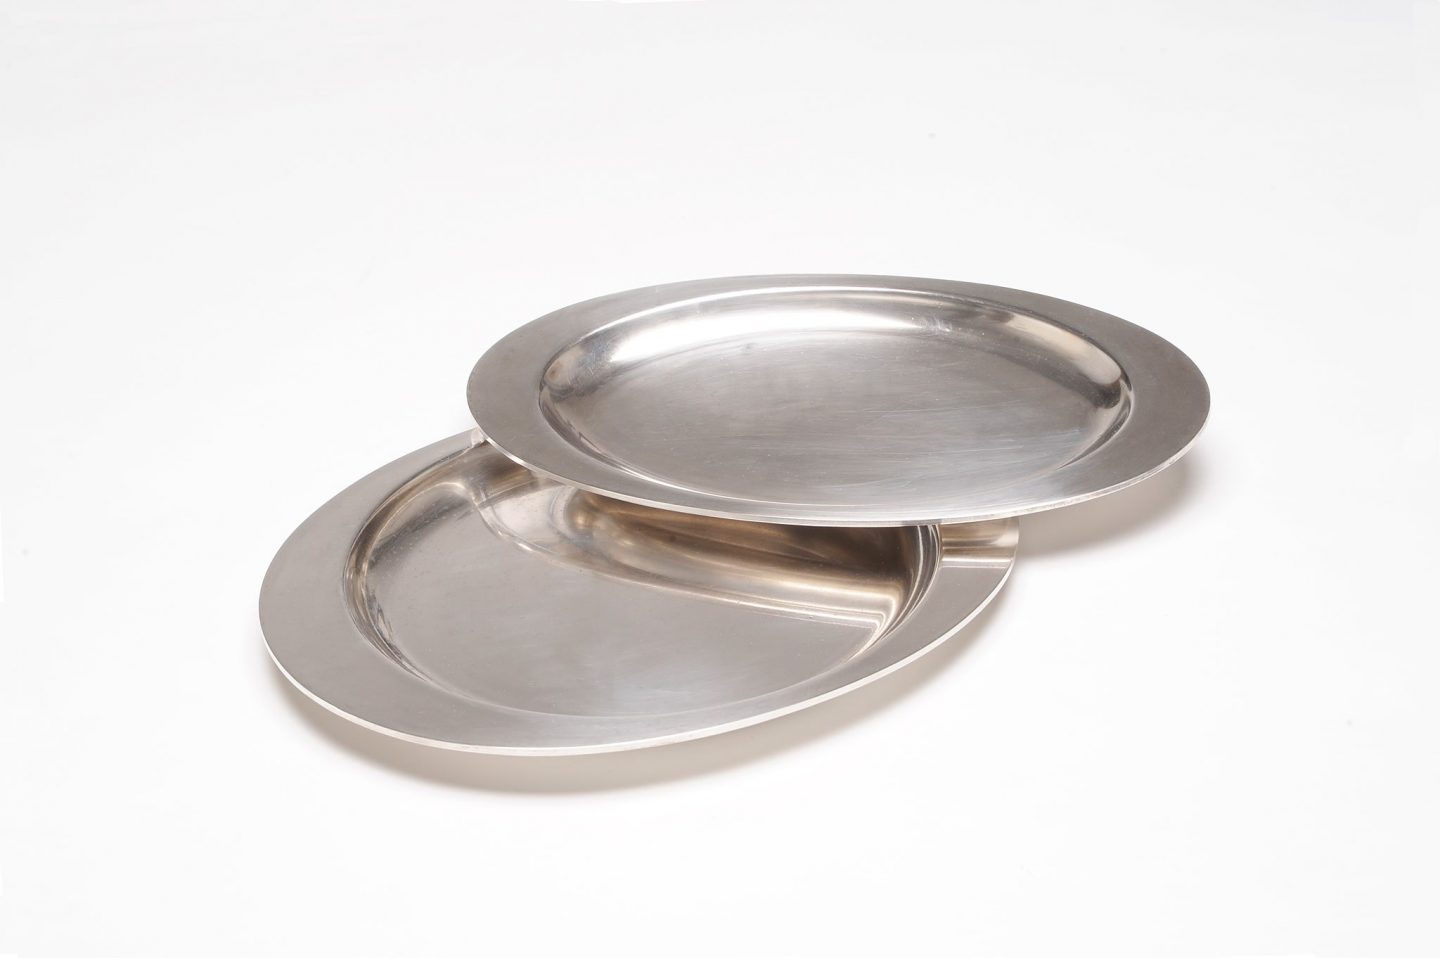 COLLECTION OF STAINLESS STEEL TRAYS